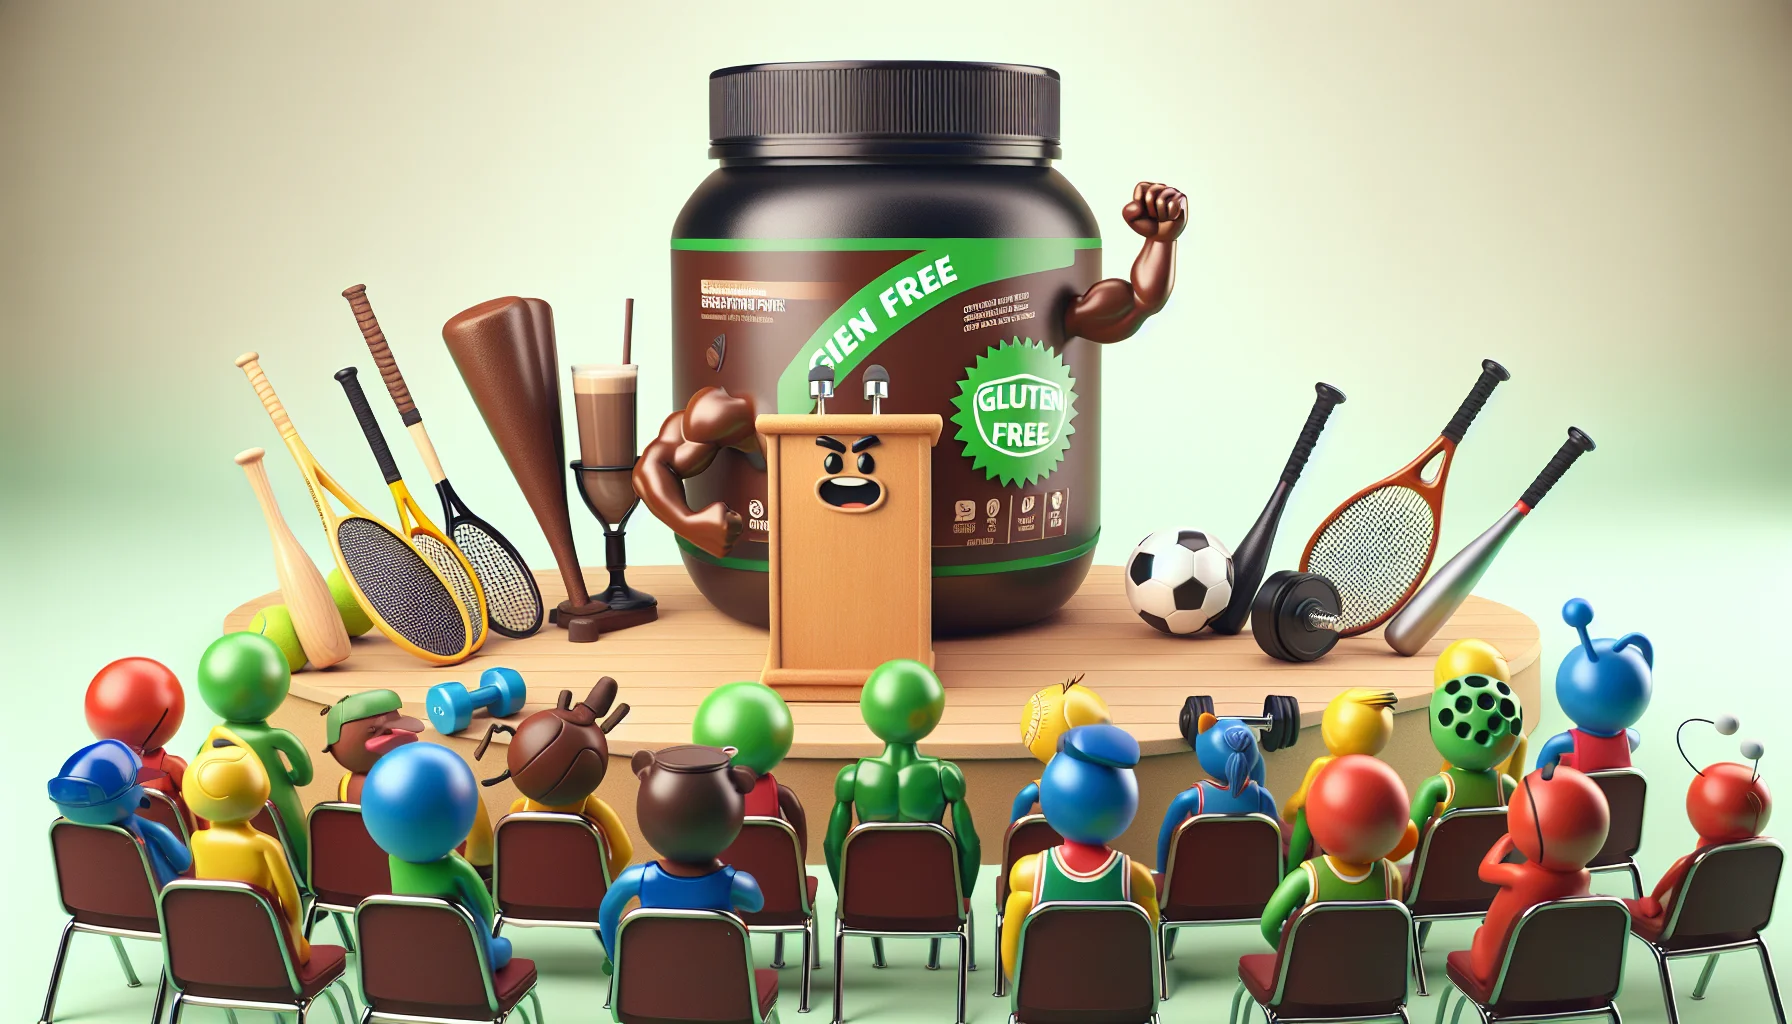 Create a humorous scene where a container of coffee-colored whey protein powder is standing on a podium, giving a passionate speech to an audience of various sports equipment - baseball bats, tennis racquets, soccer balls, and dumbbells. The whey protein proudly flaunts a big green badge stating 'Gluten Free'. A few protein bars and shakes in the audience express visible delight and cheer for their new gluten-free friend. Add a jovial tone with bright and cheerful colors, suggesting that supplementing for sports can be a fun and enjoyable endeavor.